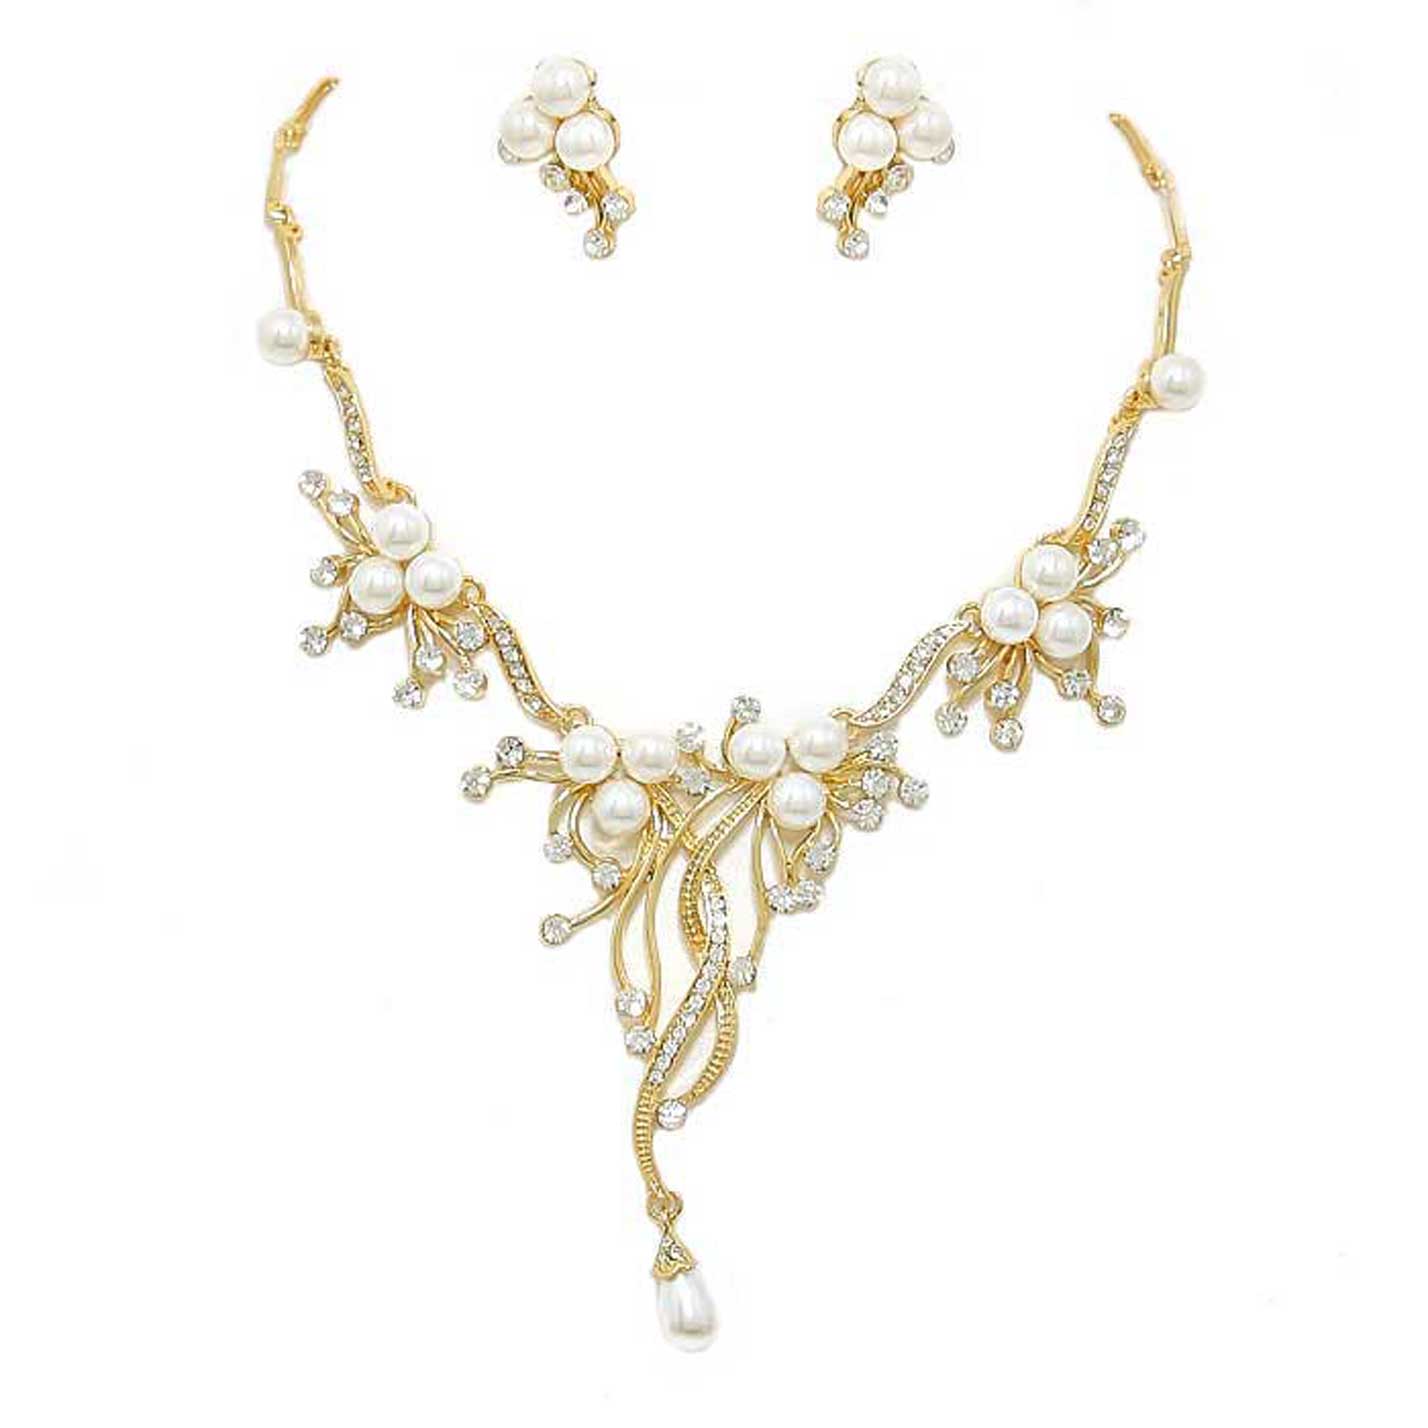 Gold Pearl Accented Floral Rhinestone Necklace. Get ready with these pearl necklace, put on a pop of shine to complete your ensemble. Perfect for adding just the right amount of shimmer and a touch of class to special events. These classy necklaces are perfect for Party, Wedding and Evening. Awesome gift for birthday, Anniversary, Valentine’s Day or any special occasion.